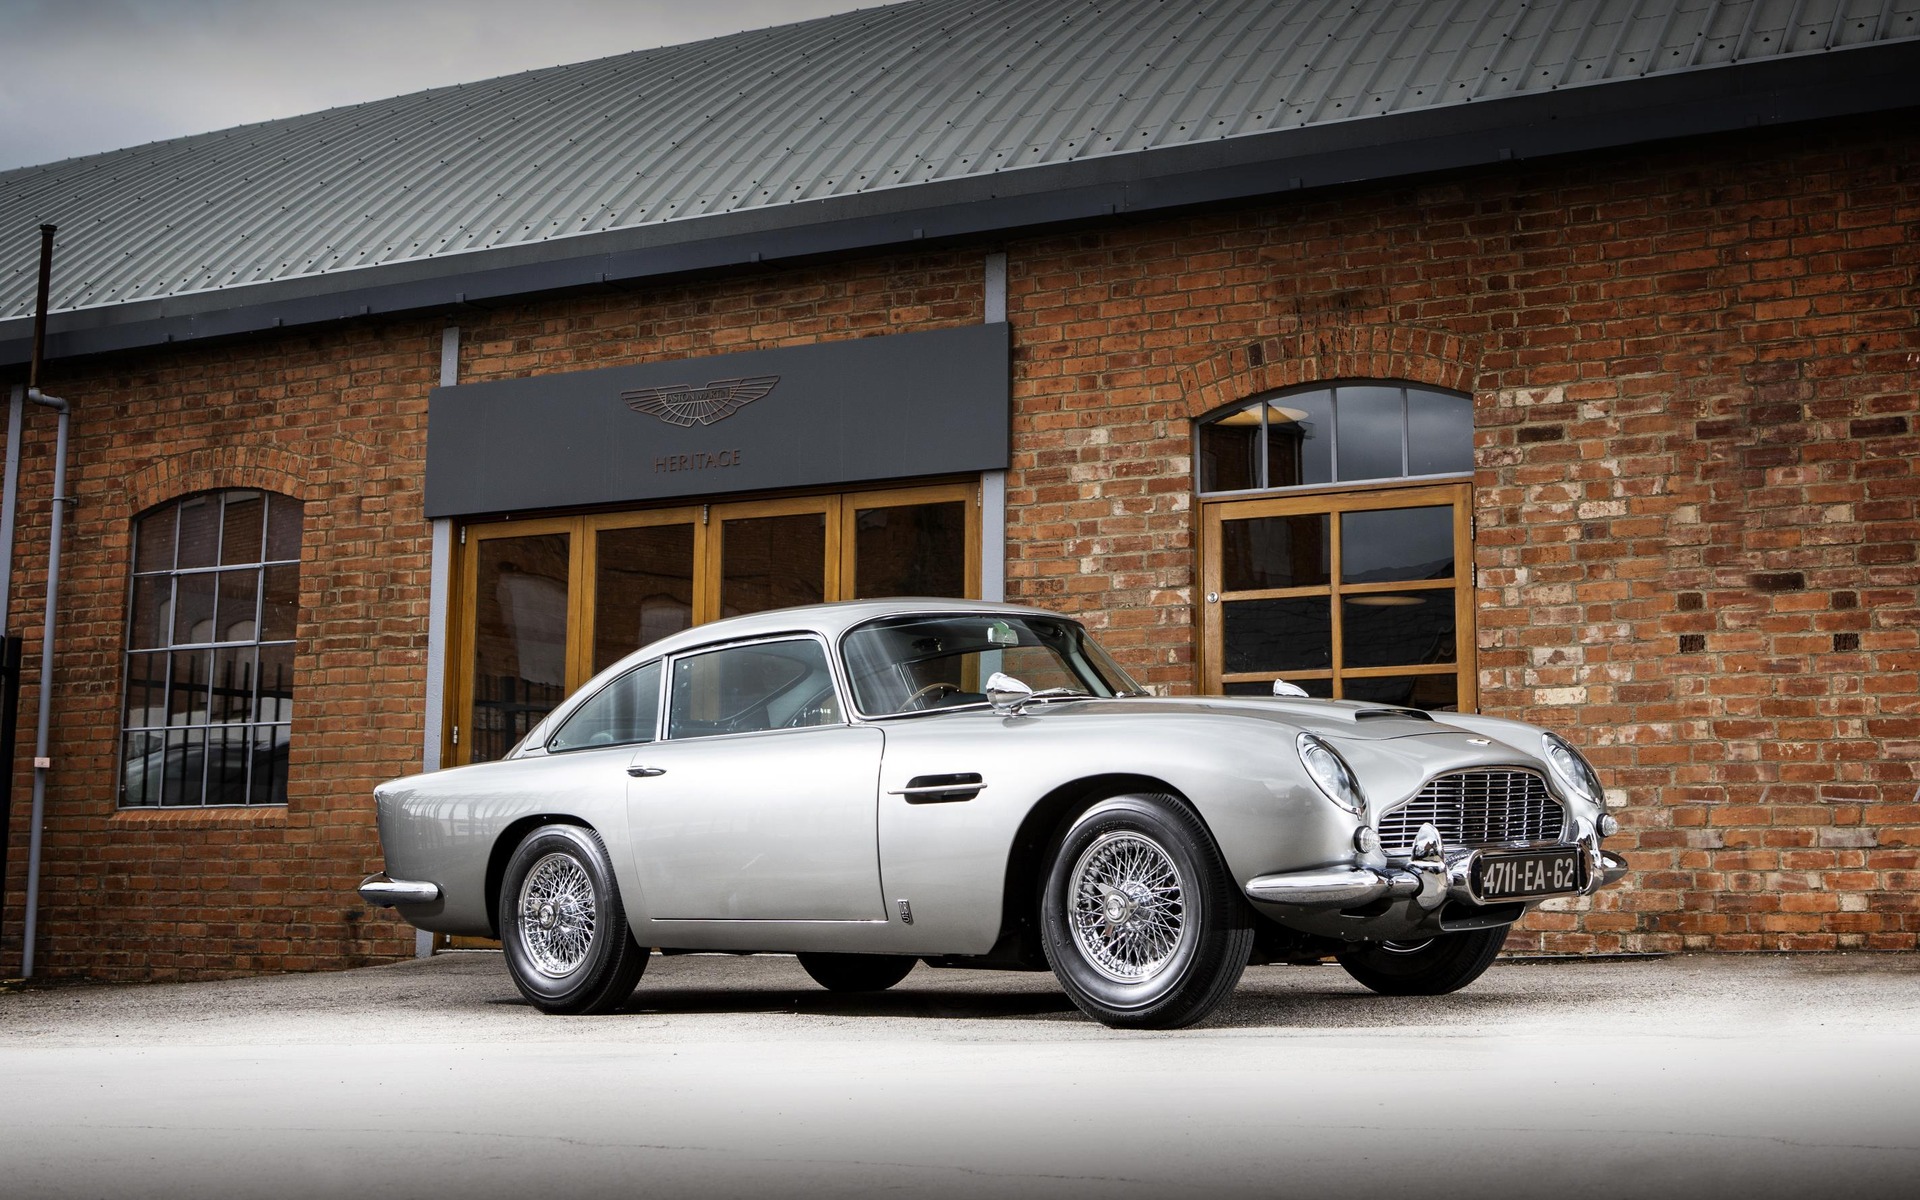 James Bond's 1965 Aston Martin DB5 to be Auctioned - The Car Guide